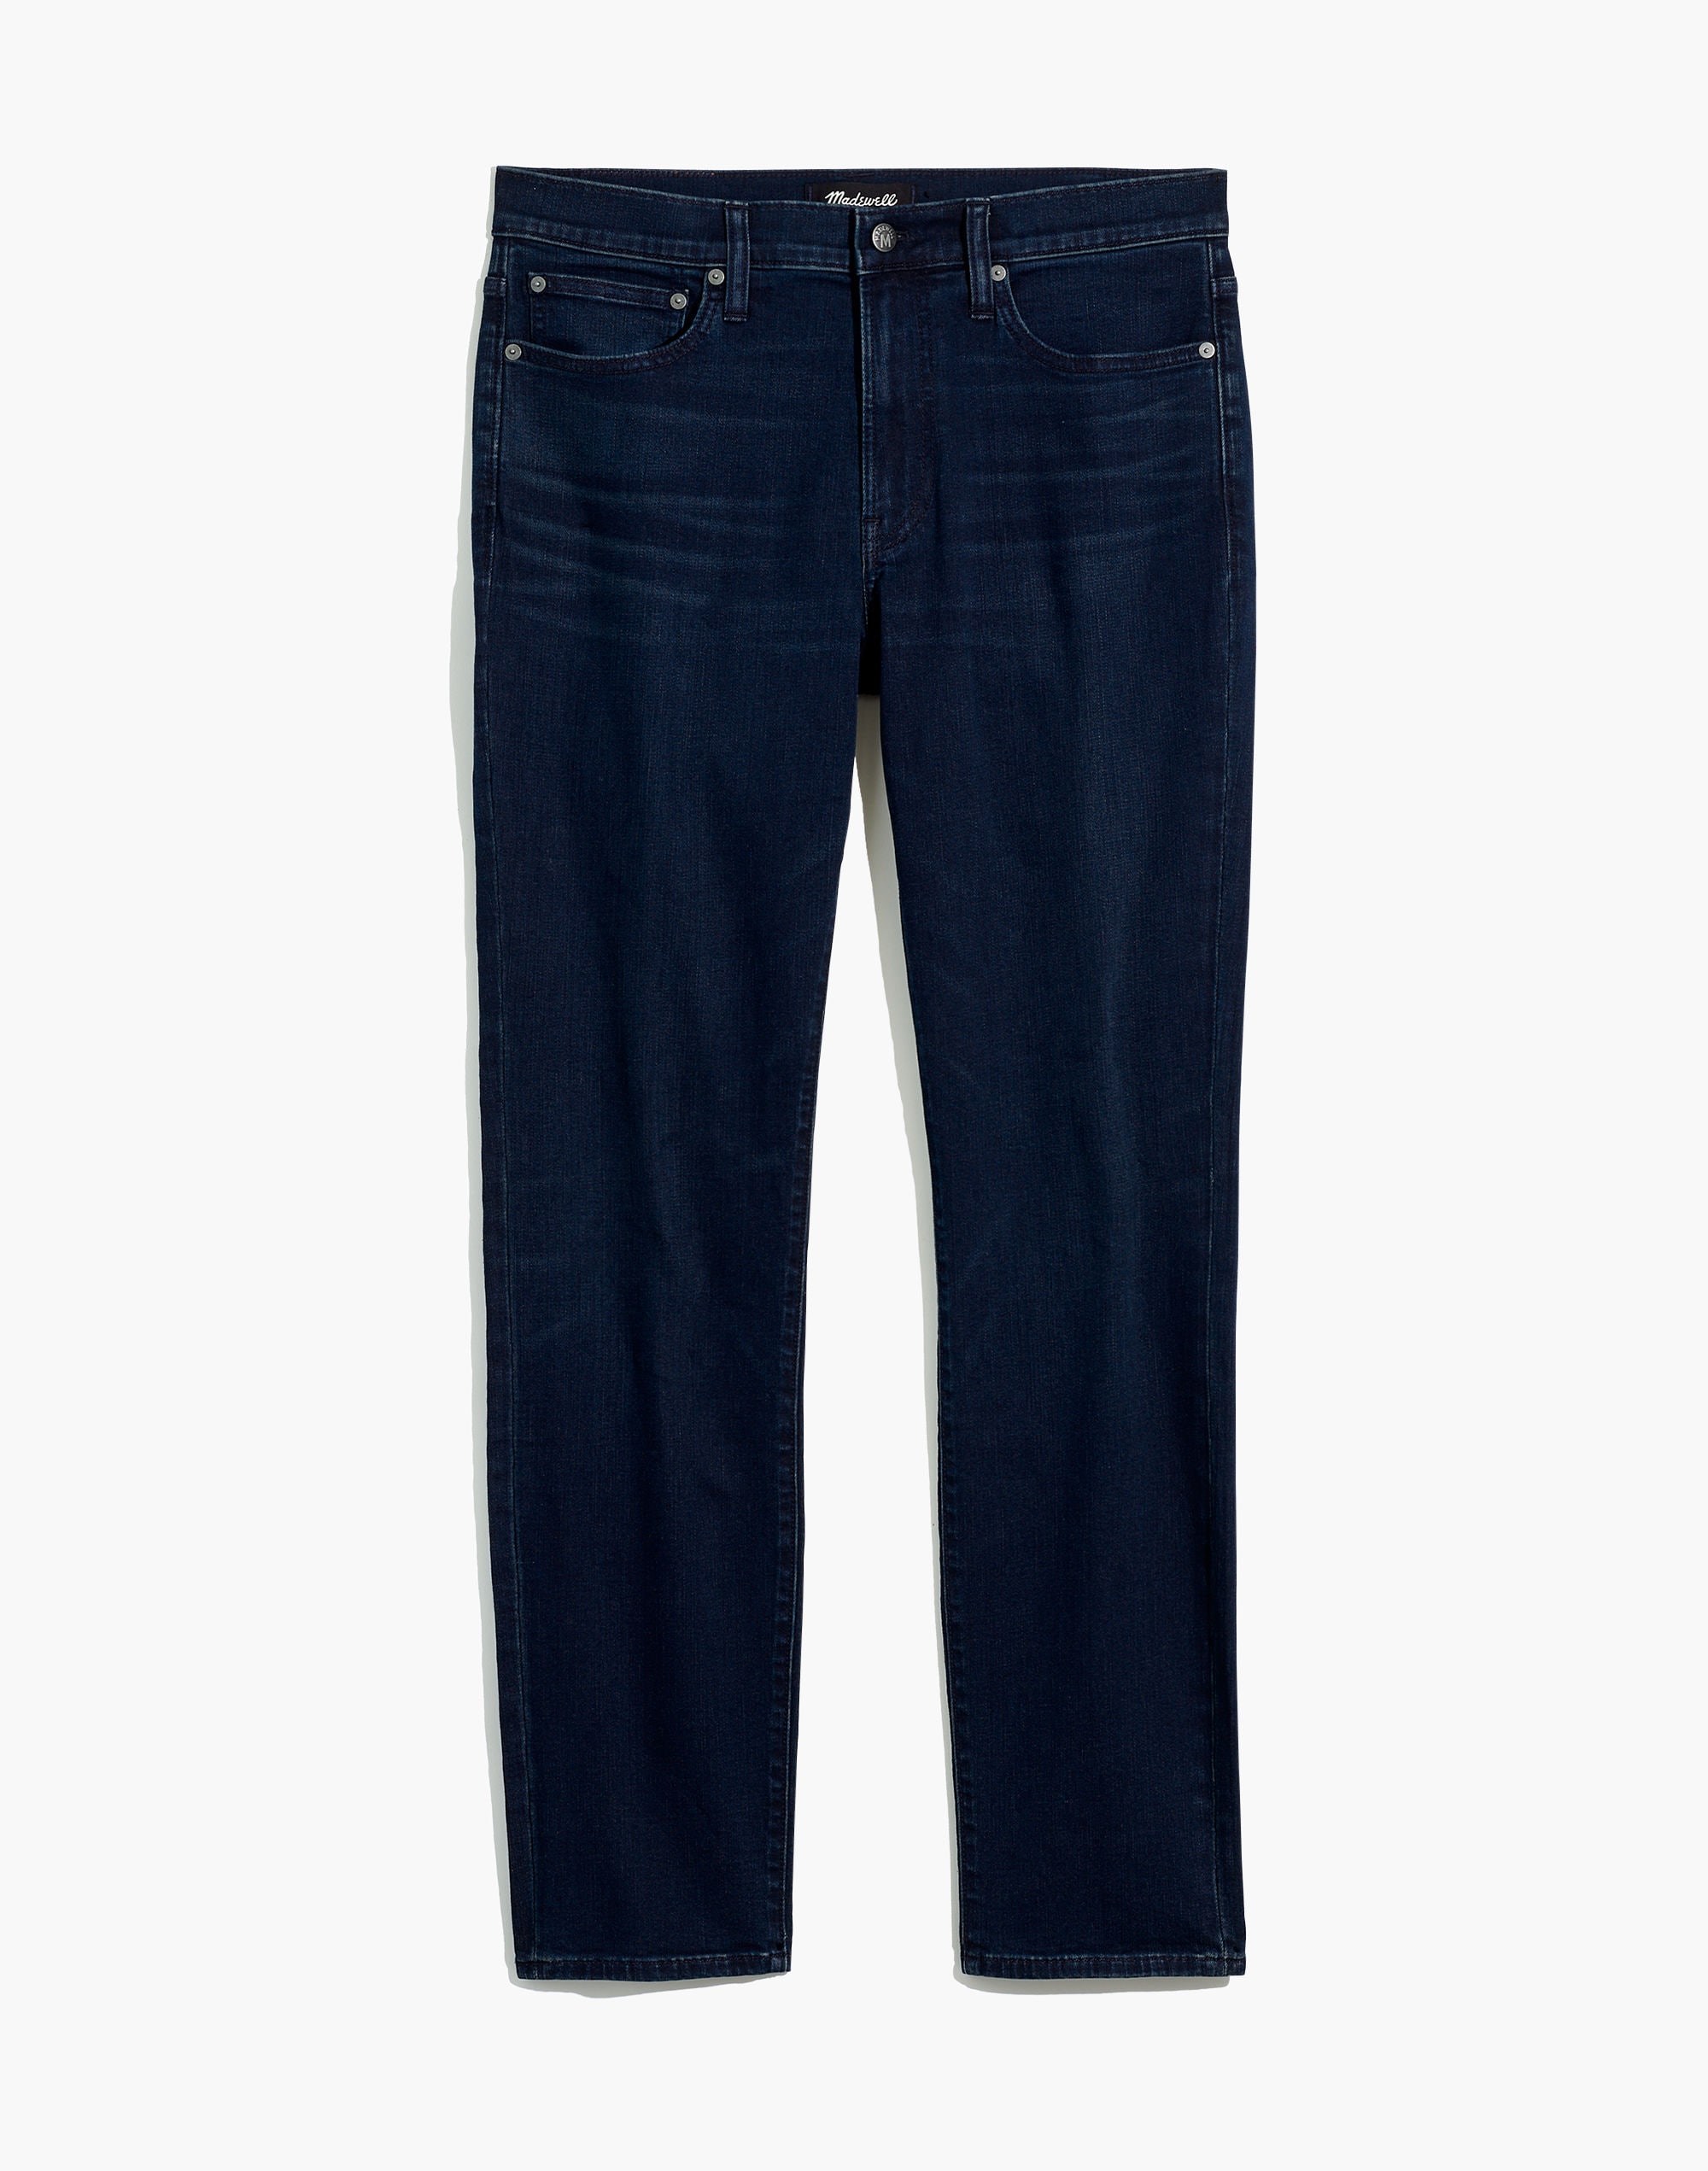 Athletic Slim Jeans in Paxson Wash